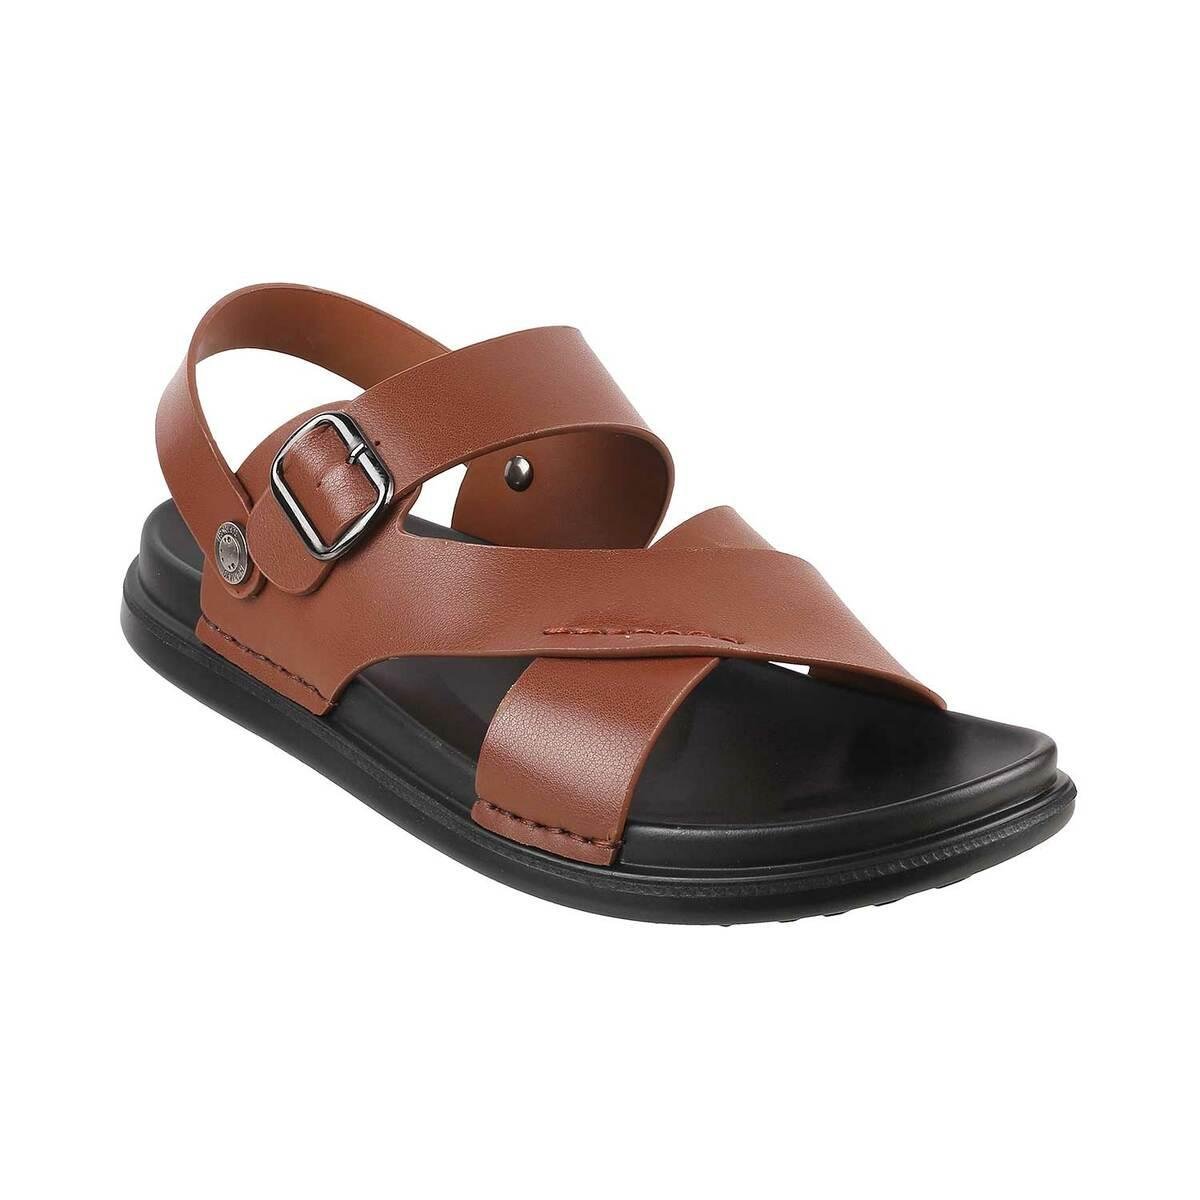 Brown Suede Leather Closed Toe sandals for Men - Mardi Gras